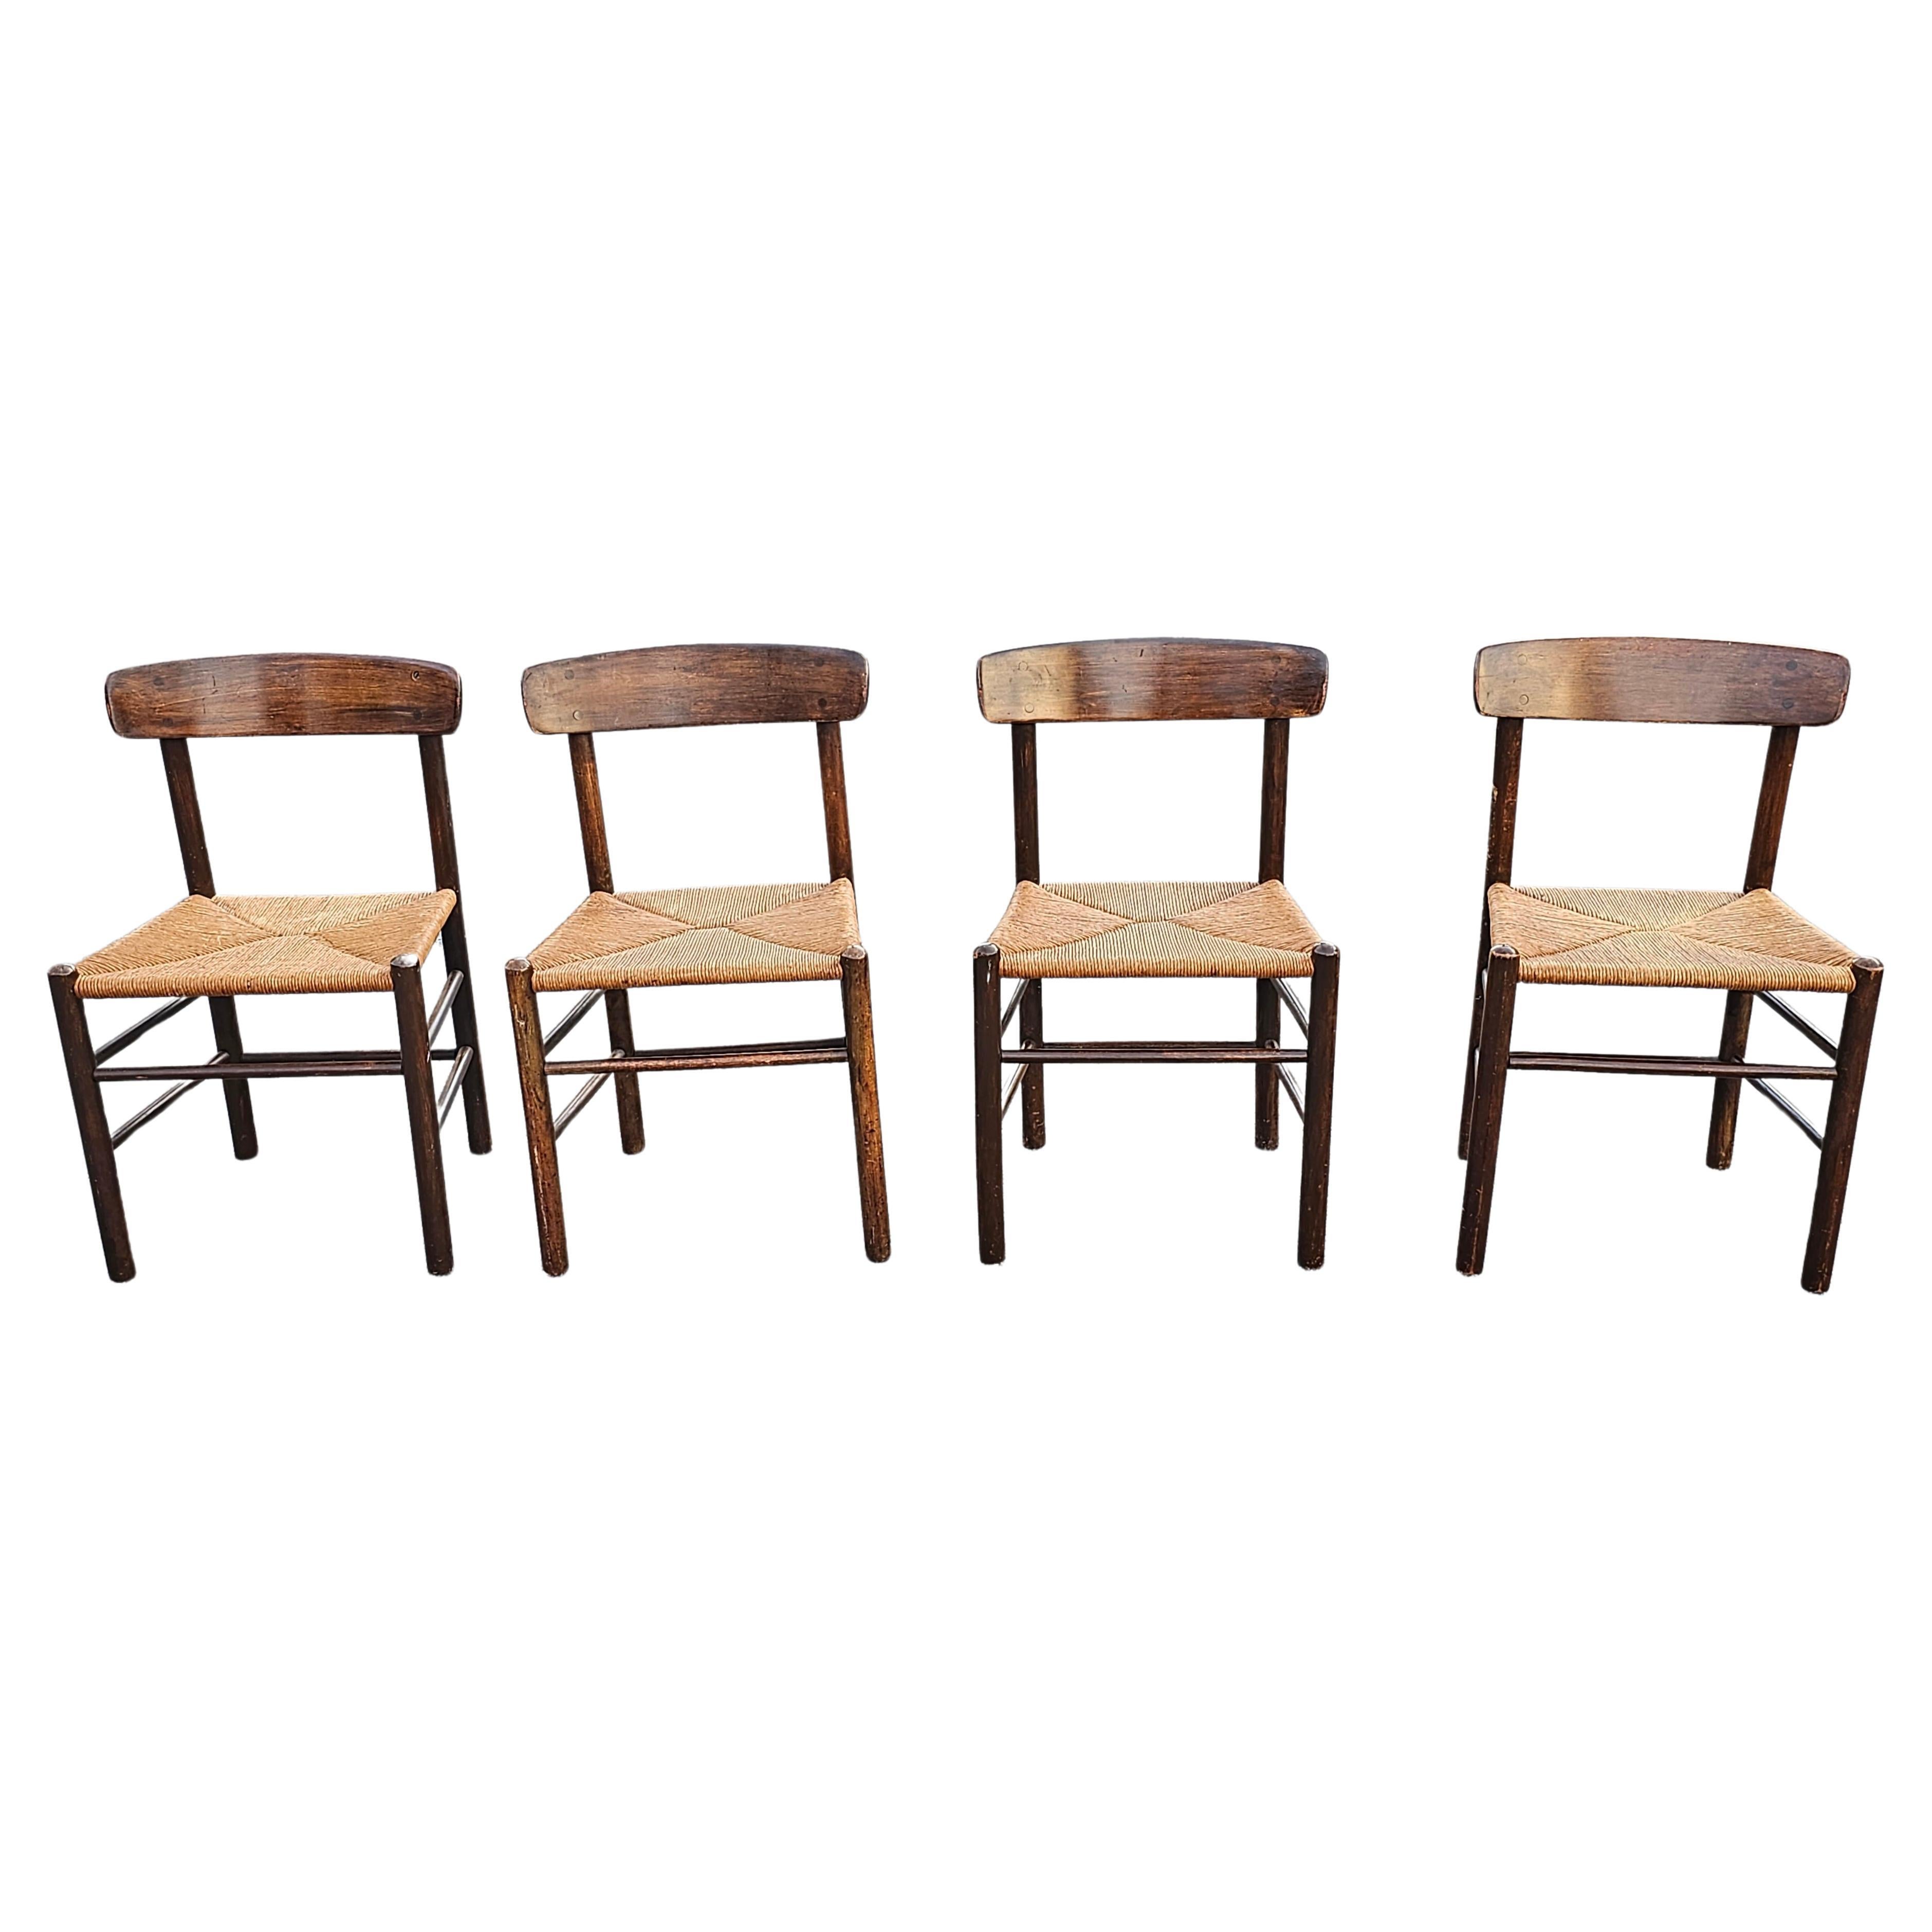 A set of Four Borge Mogensen J39 side chairs in Walnut and rush. Designed in 1947 by Borge Mogensen and Manufactured by FDB Mobler in 1960s. Measures 19